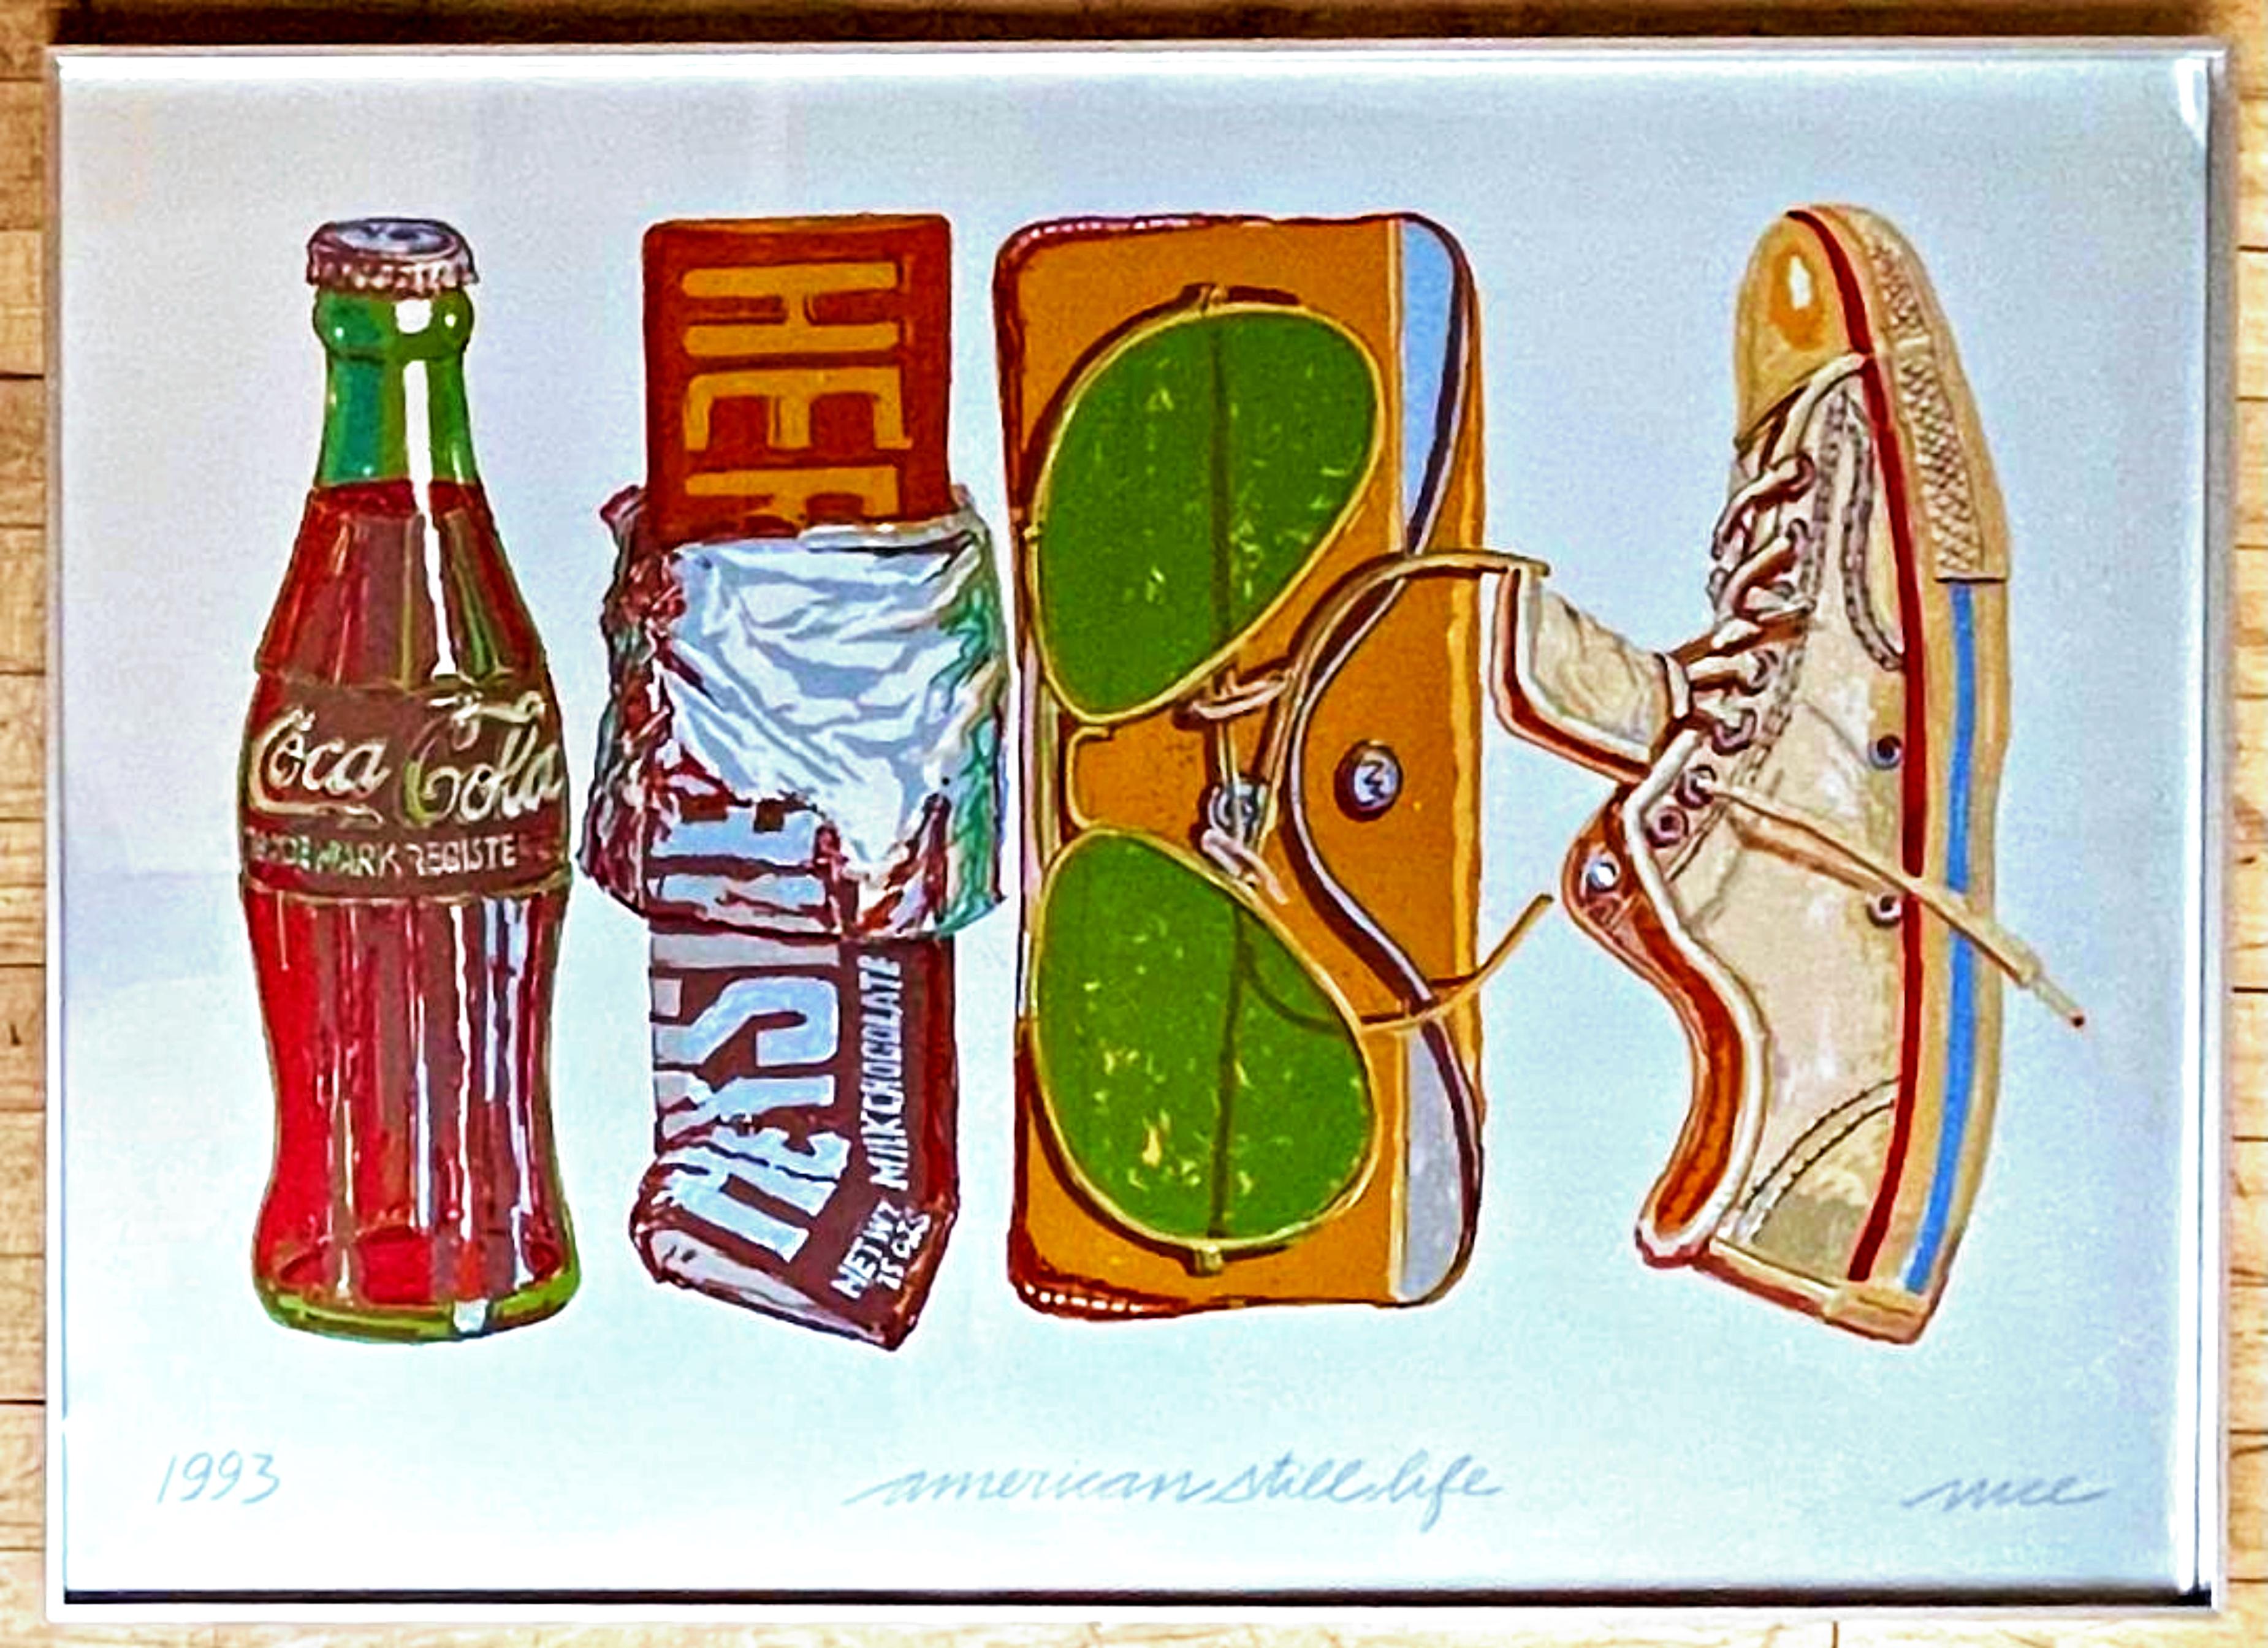 American Still Life (Hershey's Chocolate, Coca Cola (COKE), Glasses, Sneakers) - Mixed Media Art by Don Nice